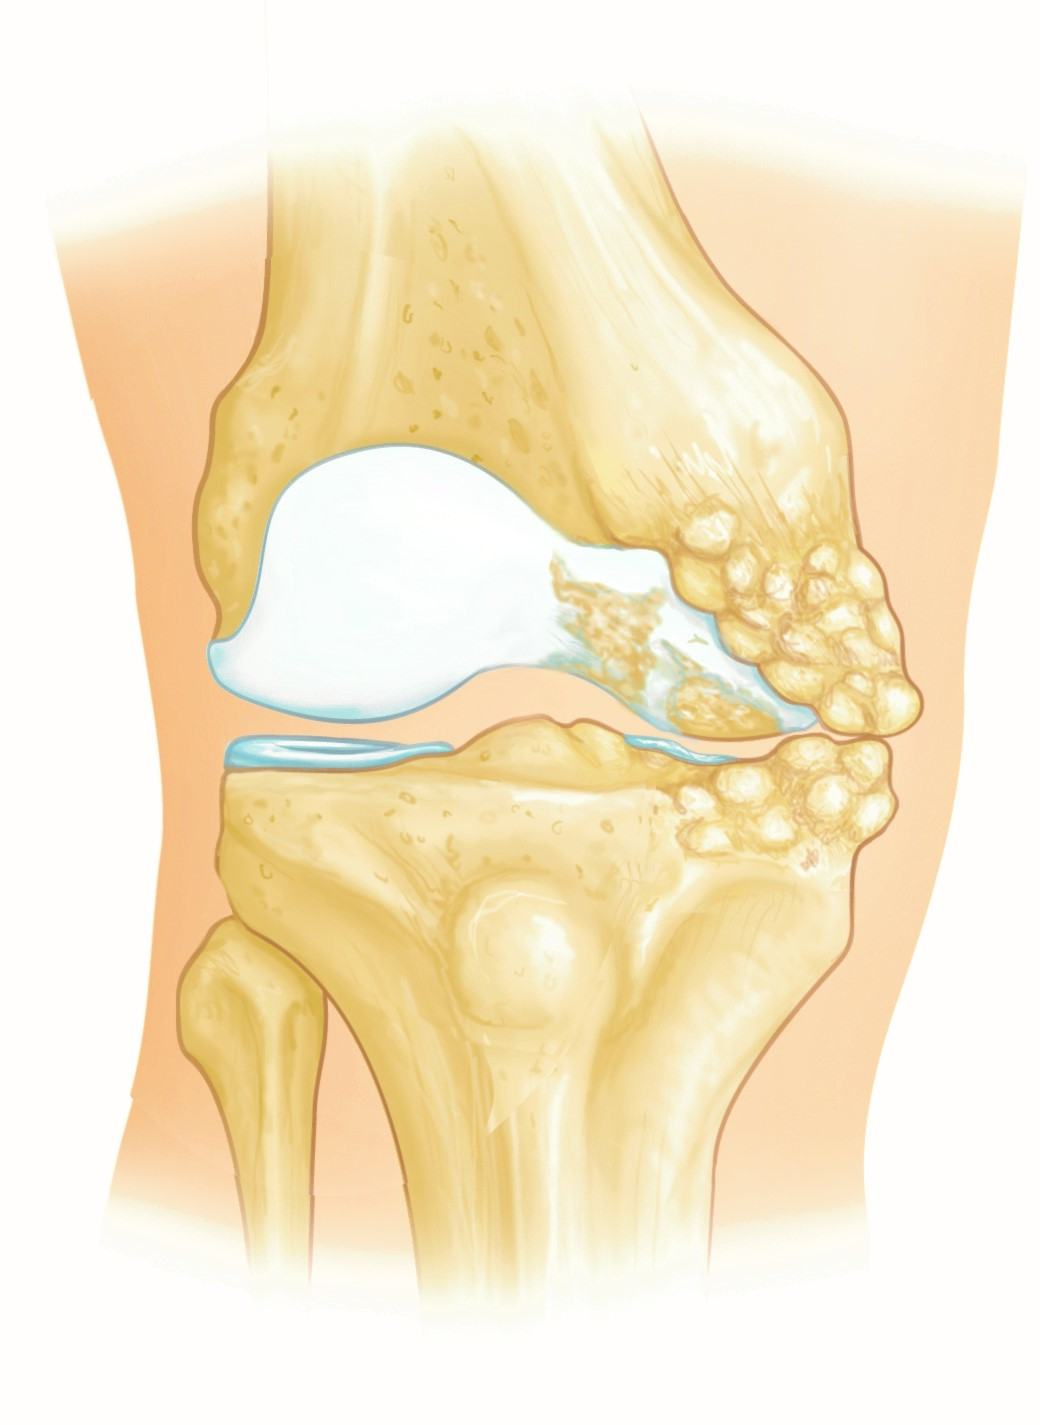 Osteoarthritis limited to medial compartment of the knee